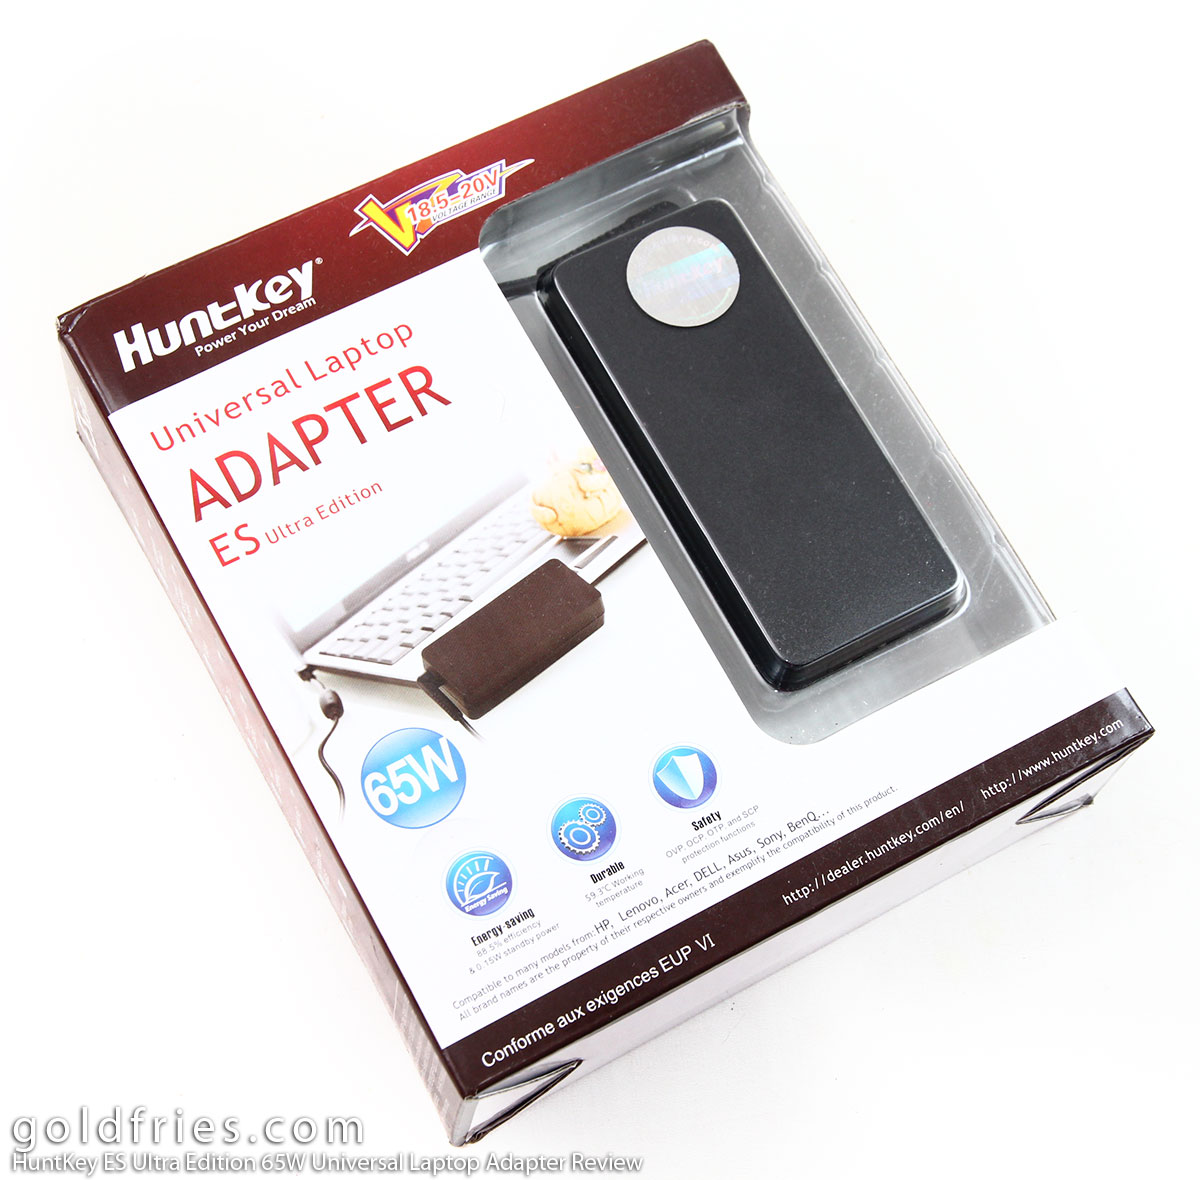 HuntKey ES Ultra Edition 65W Universal Laptop Adapter Review